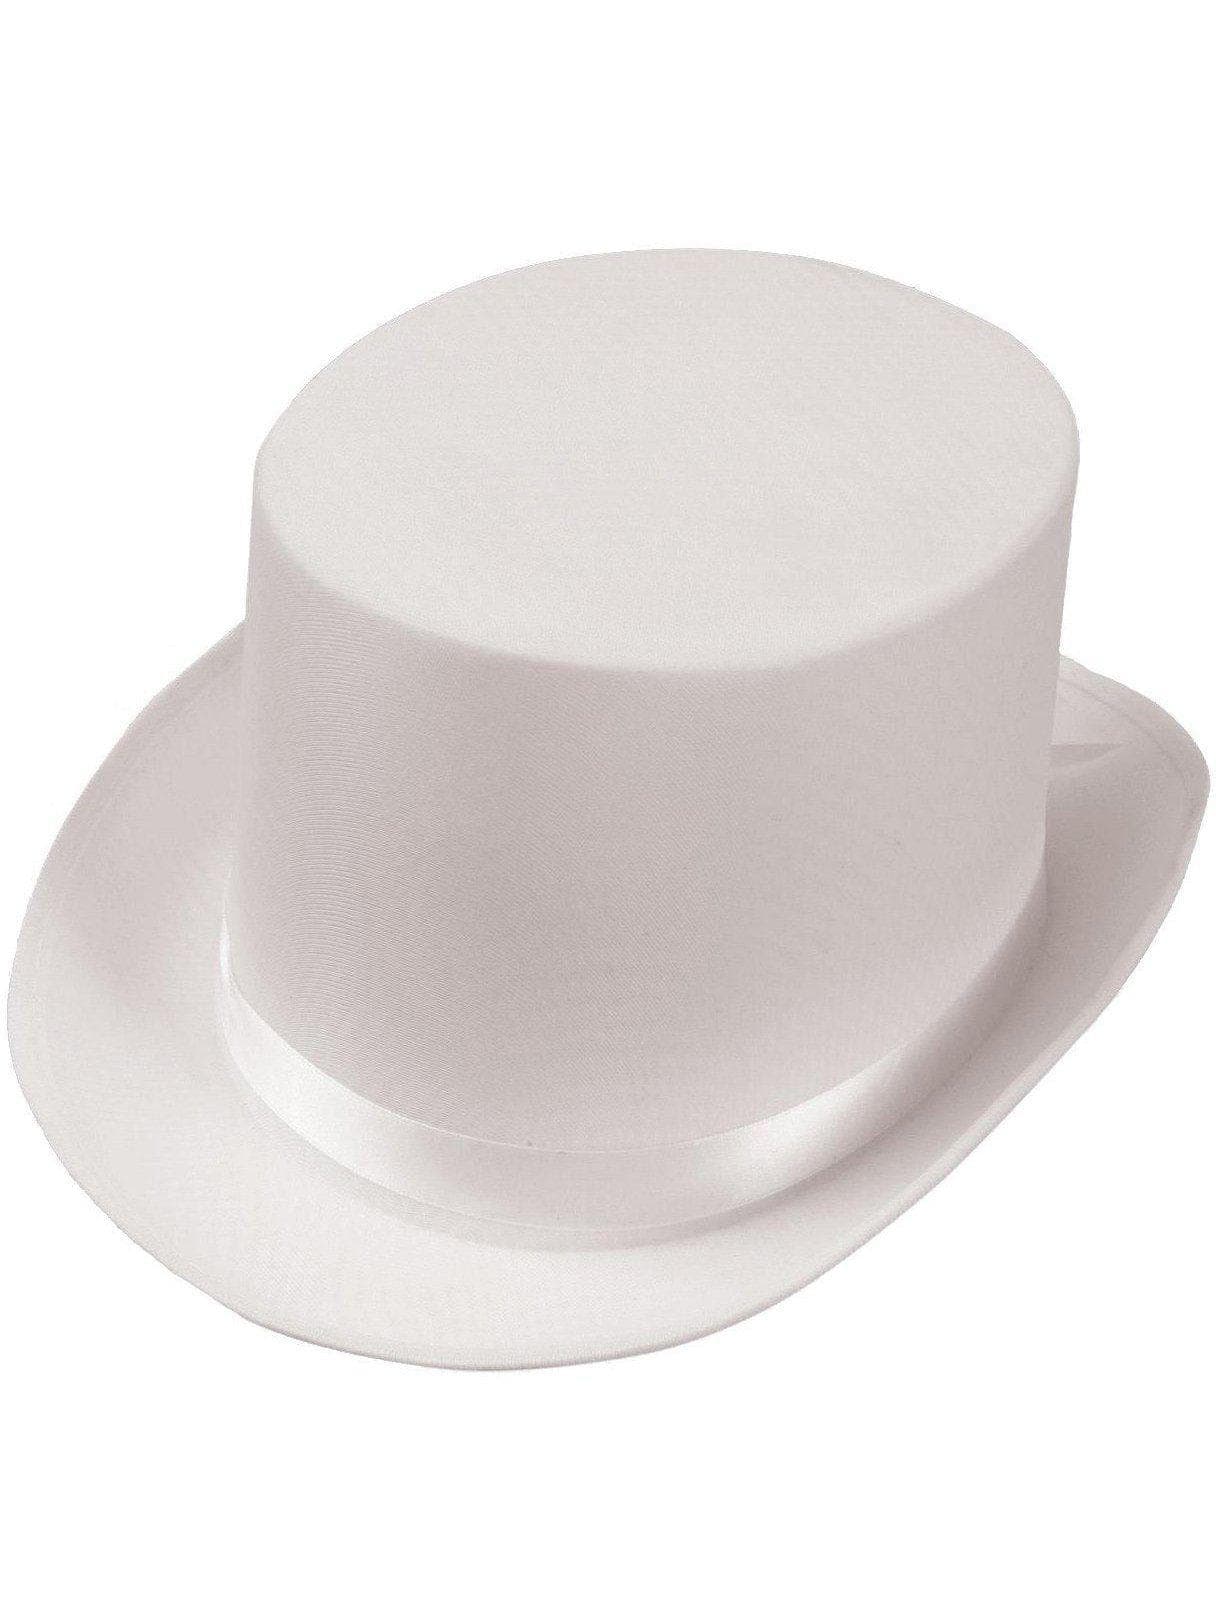 Adult White Top Hat - costumes.com